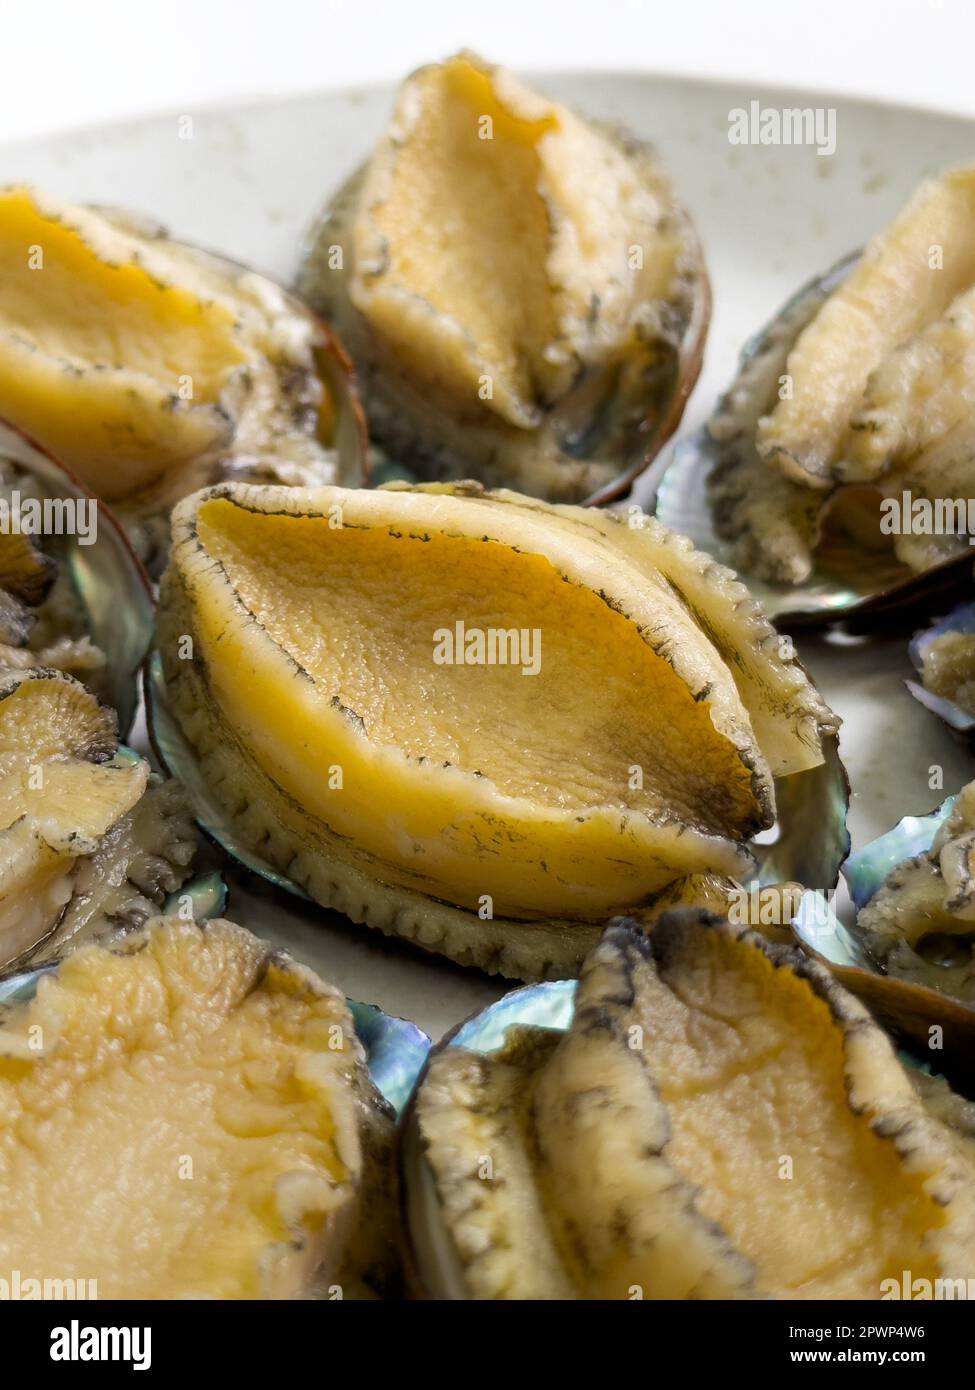 Delicious raw abalone in a plate on white table background. Stock Photo